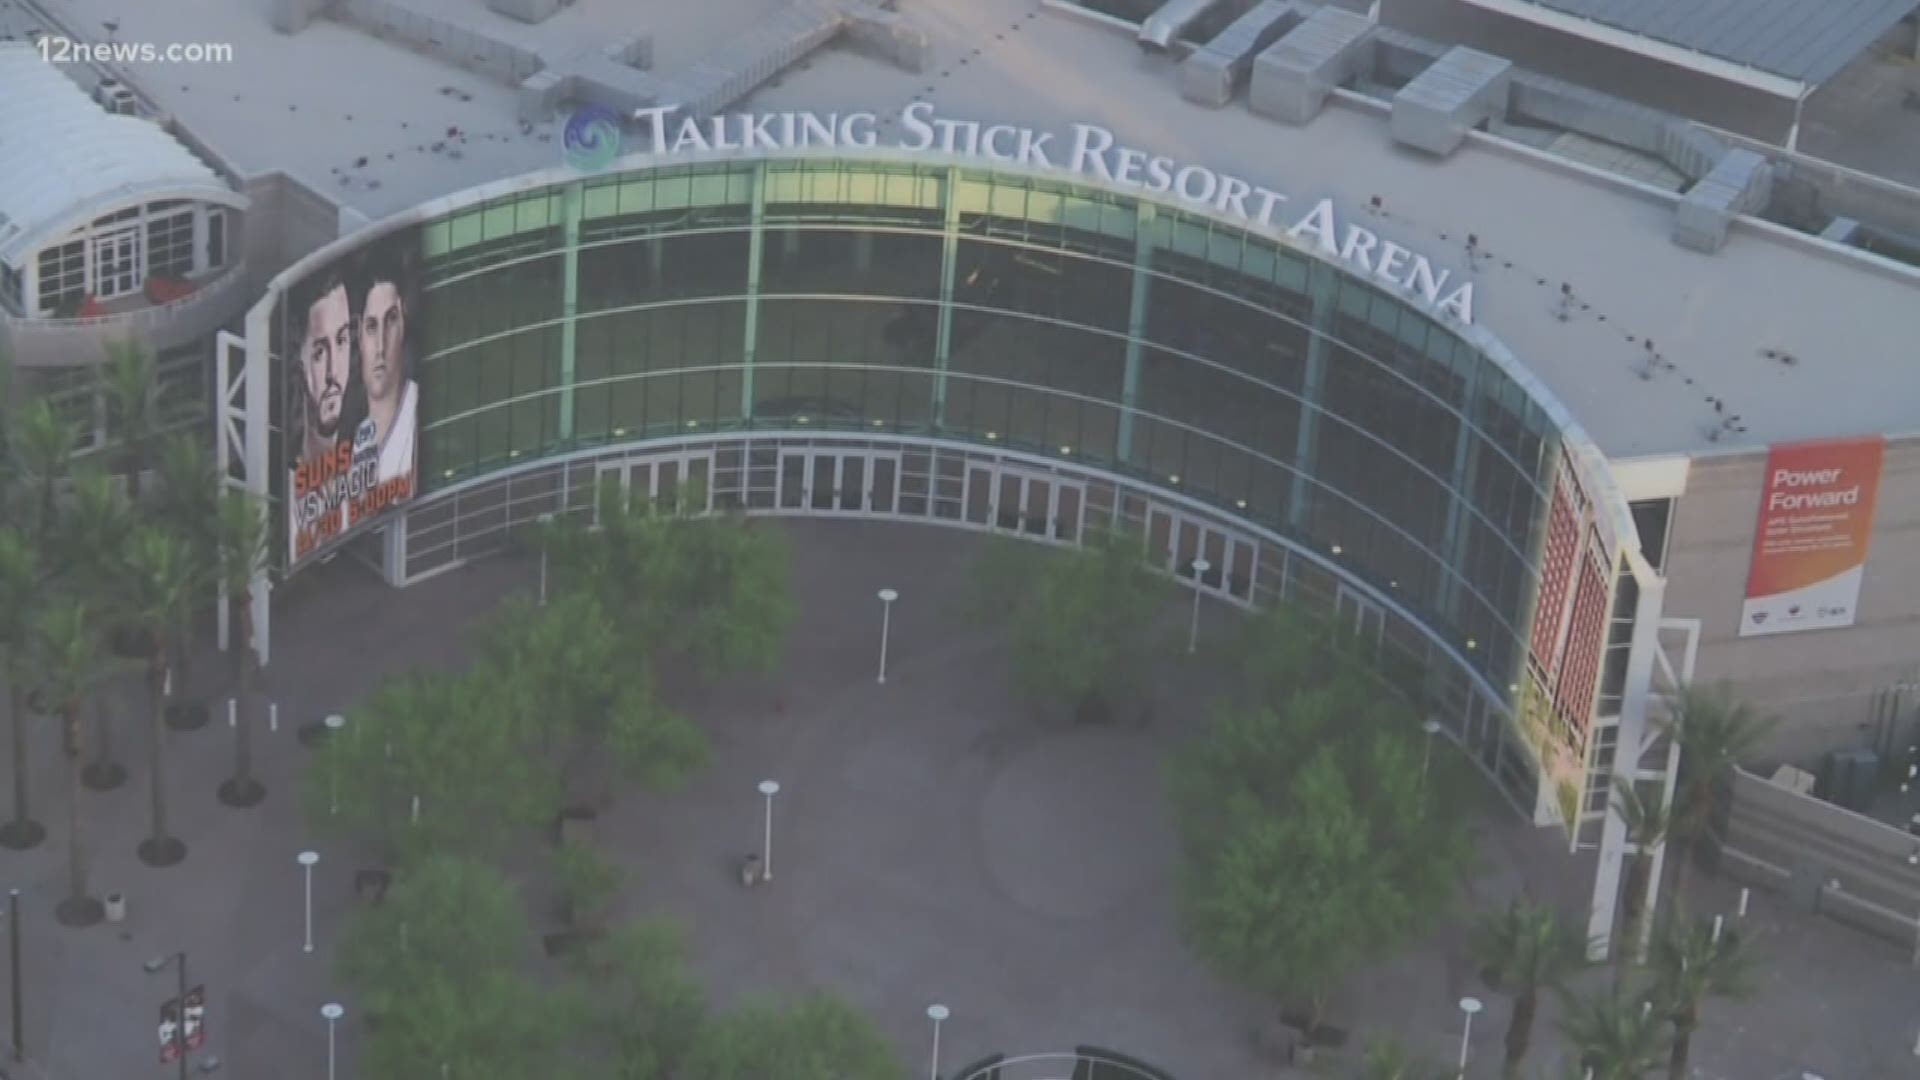 In a 6-2 vote, the Phoenix City Council passed a $230 million deal to keep the Suns at the Talking Stick Arena. Part of the renovation money will come from a tourism tax fund.